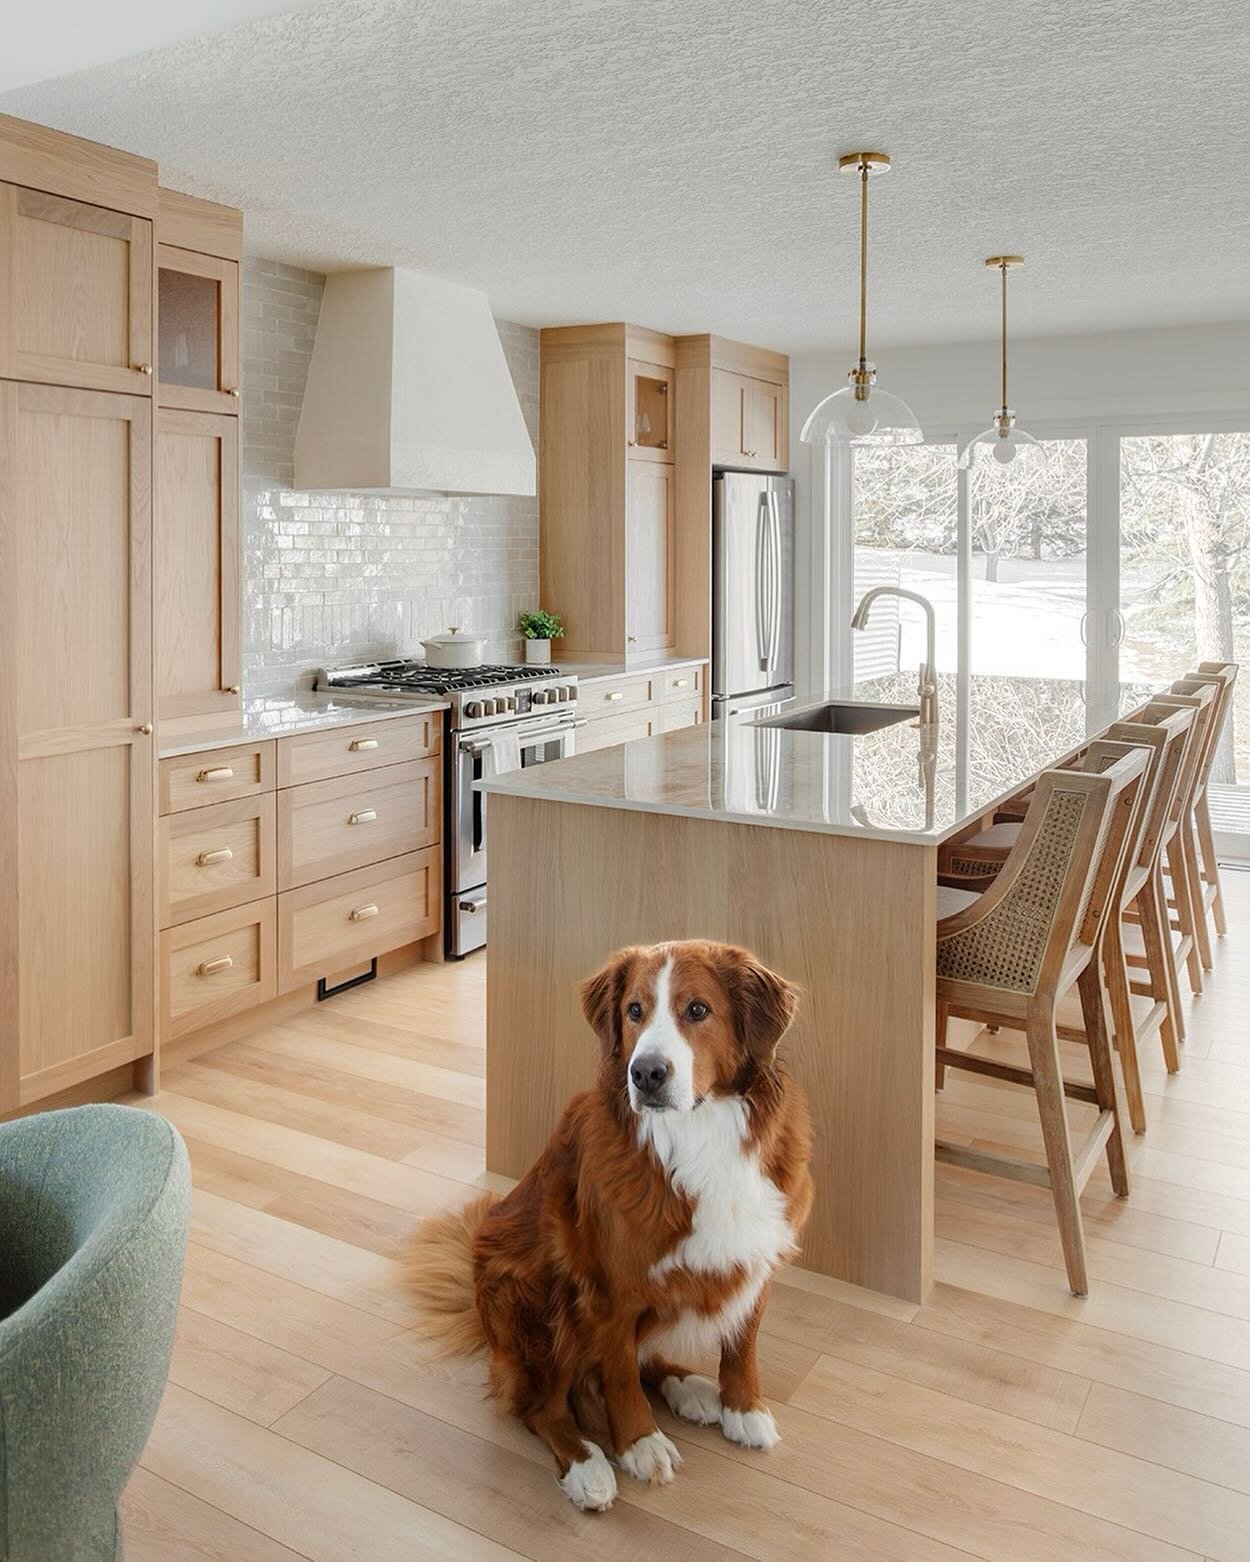 When the home owners dog is THIS gorg you have to include it in photos! Loved photographing this beautiful renovation by @streitrenovations 😍
.
.
#CalgaryPhotographer #CalgaryInteriorPhotographer #CalgaryInteriorDesignPhotographer  #CalgaryHomeBuild